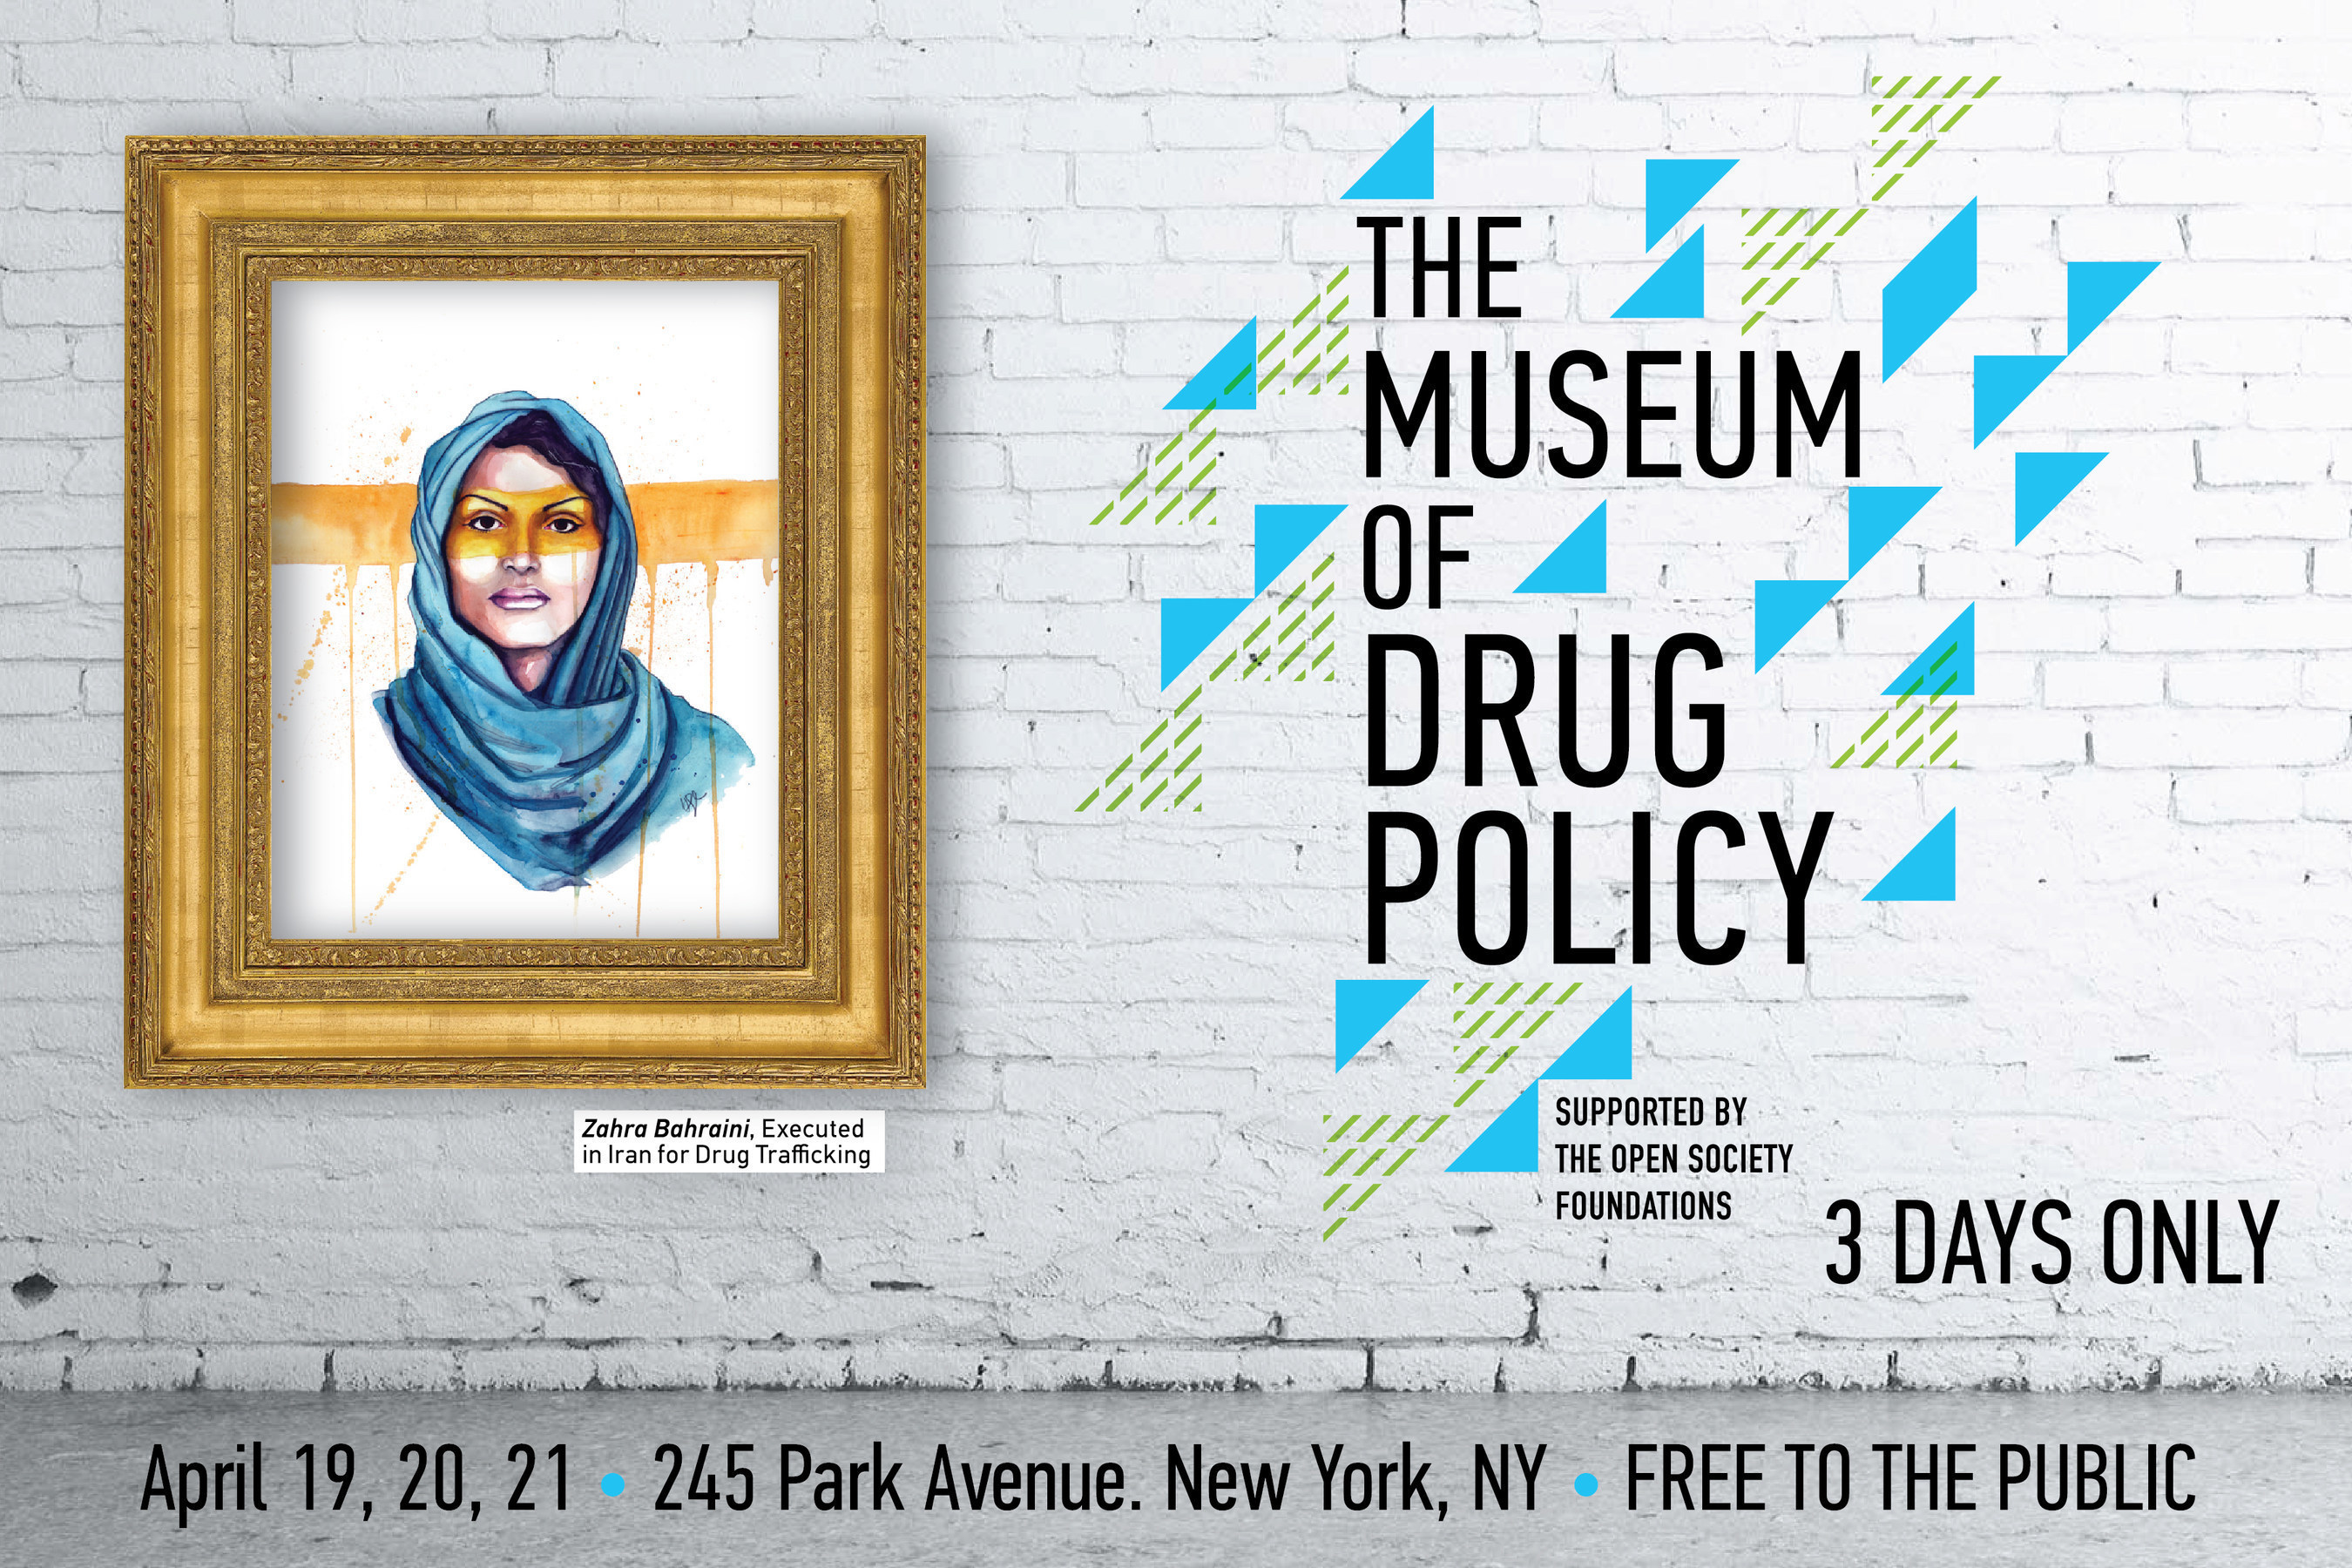 3 DAYS ONLY! FREE! Museum of Drug Policy featuring 40 artists, powerful programs and special guests. 245 Park Ave., NYC.